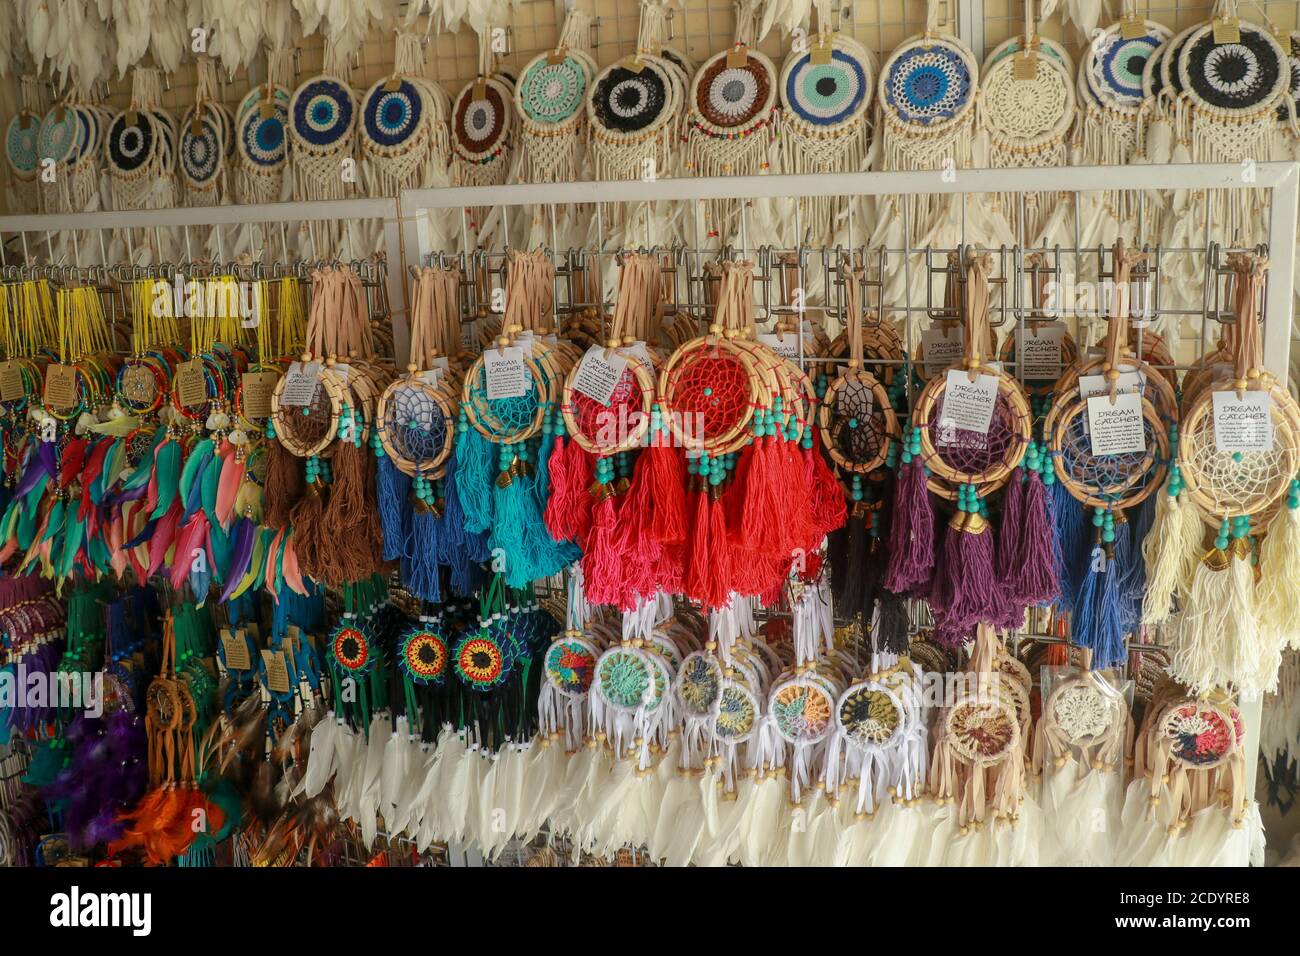 Variety of Dream Catcher done by Bali locals display in a shopl. Indonesia.  Colorful dream catcher displayed for sale. Selective focus Stock Photo -  Alamy